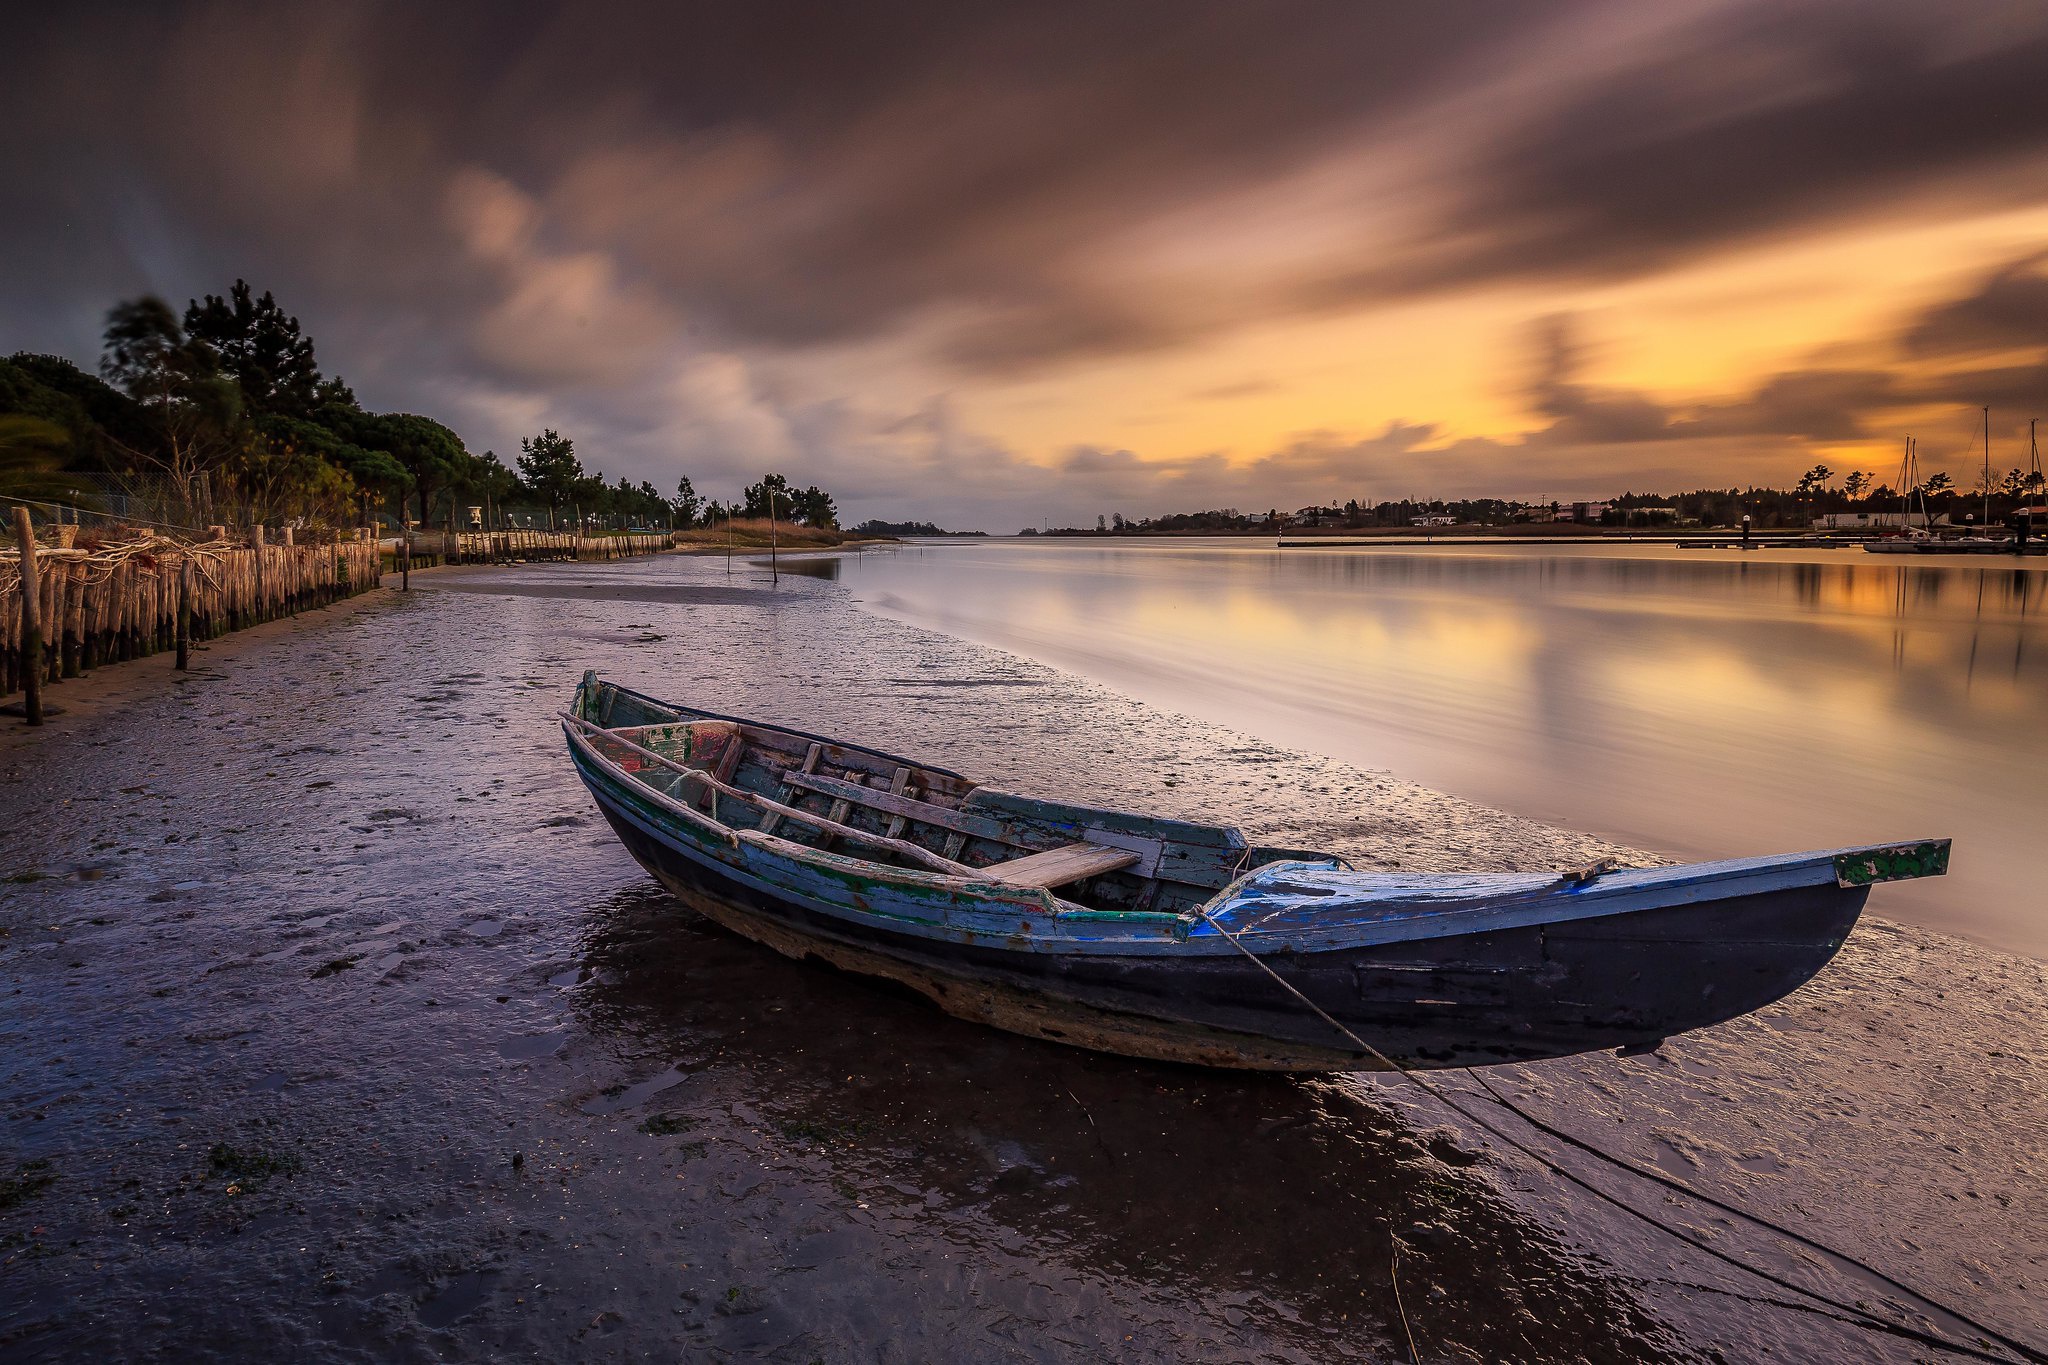 General 2048x1365 sky clouds outdoors boat water riverside long exposure river landscape sunset